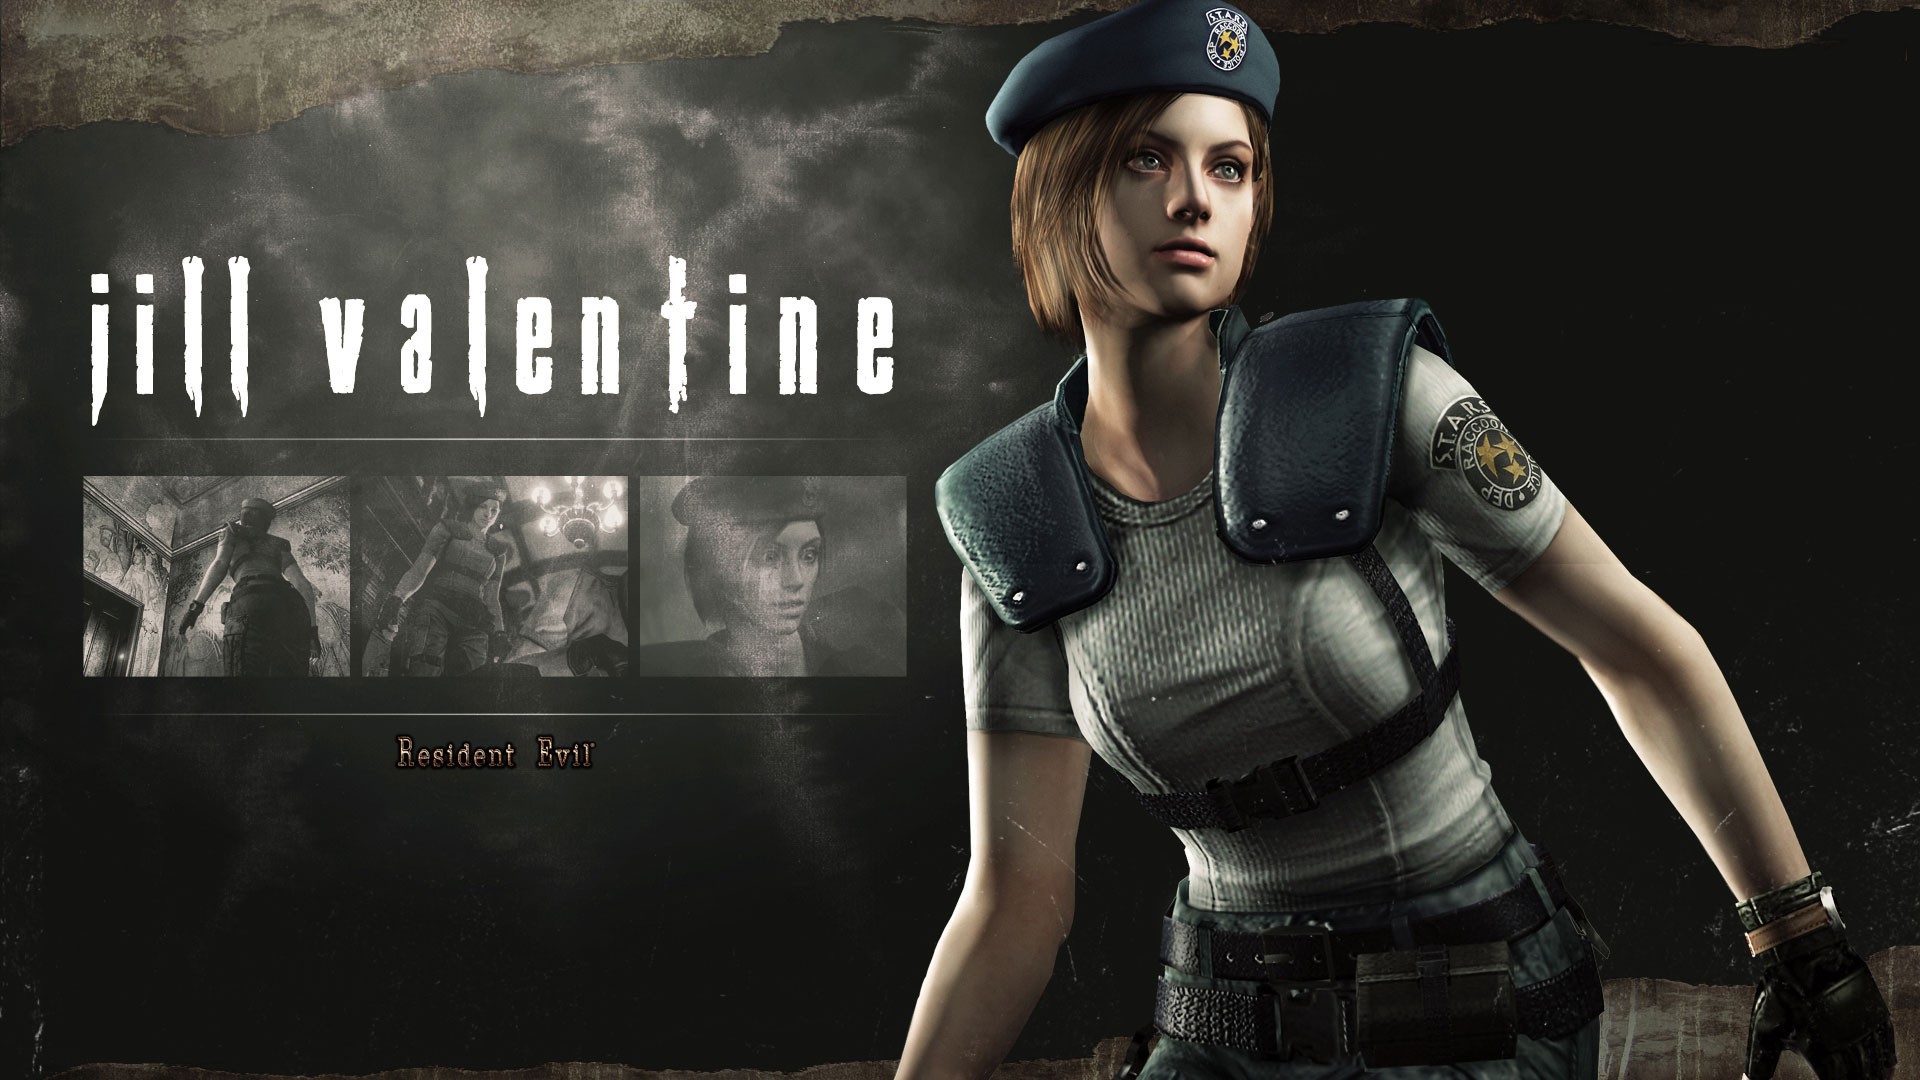 Jill Valentine From The Game Resident Evil HD Remaster